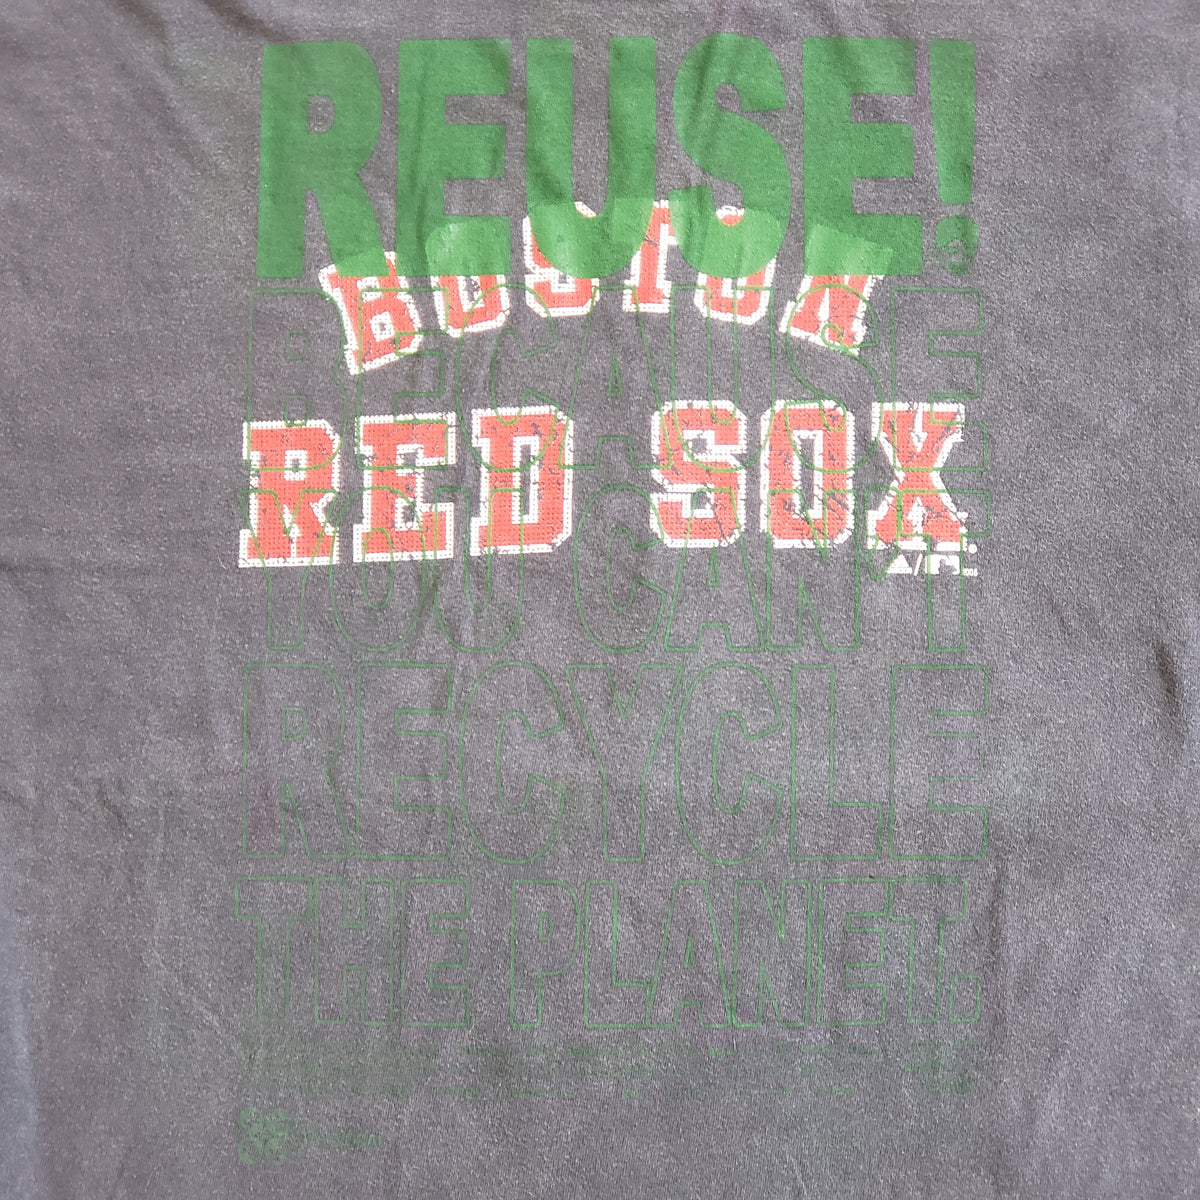 One of a Kind (Men's L) REUSE! Boston Red Sox Baseball T-Shirt – STAY VOCAL